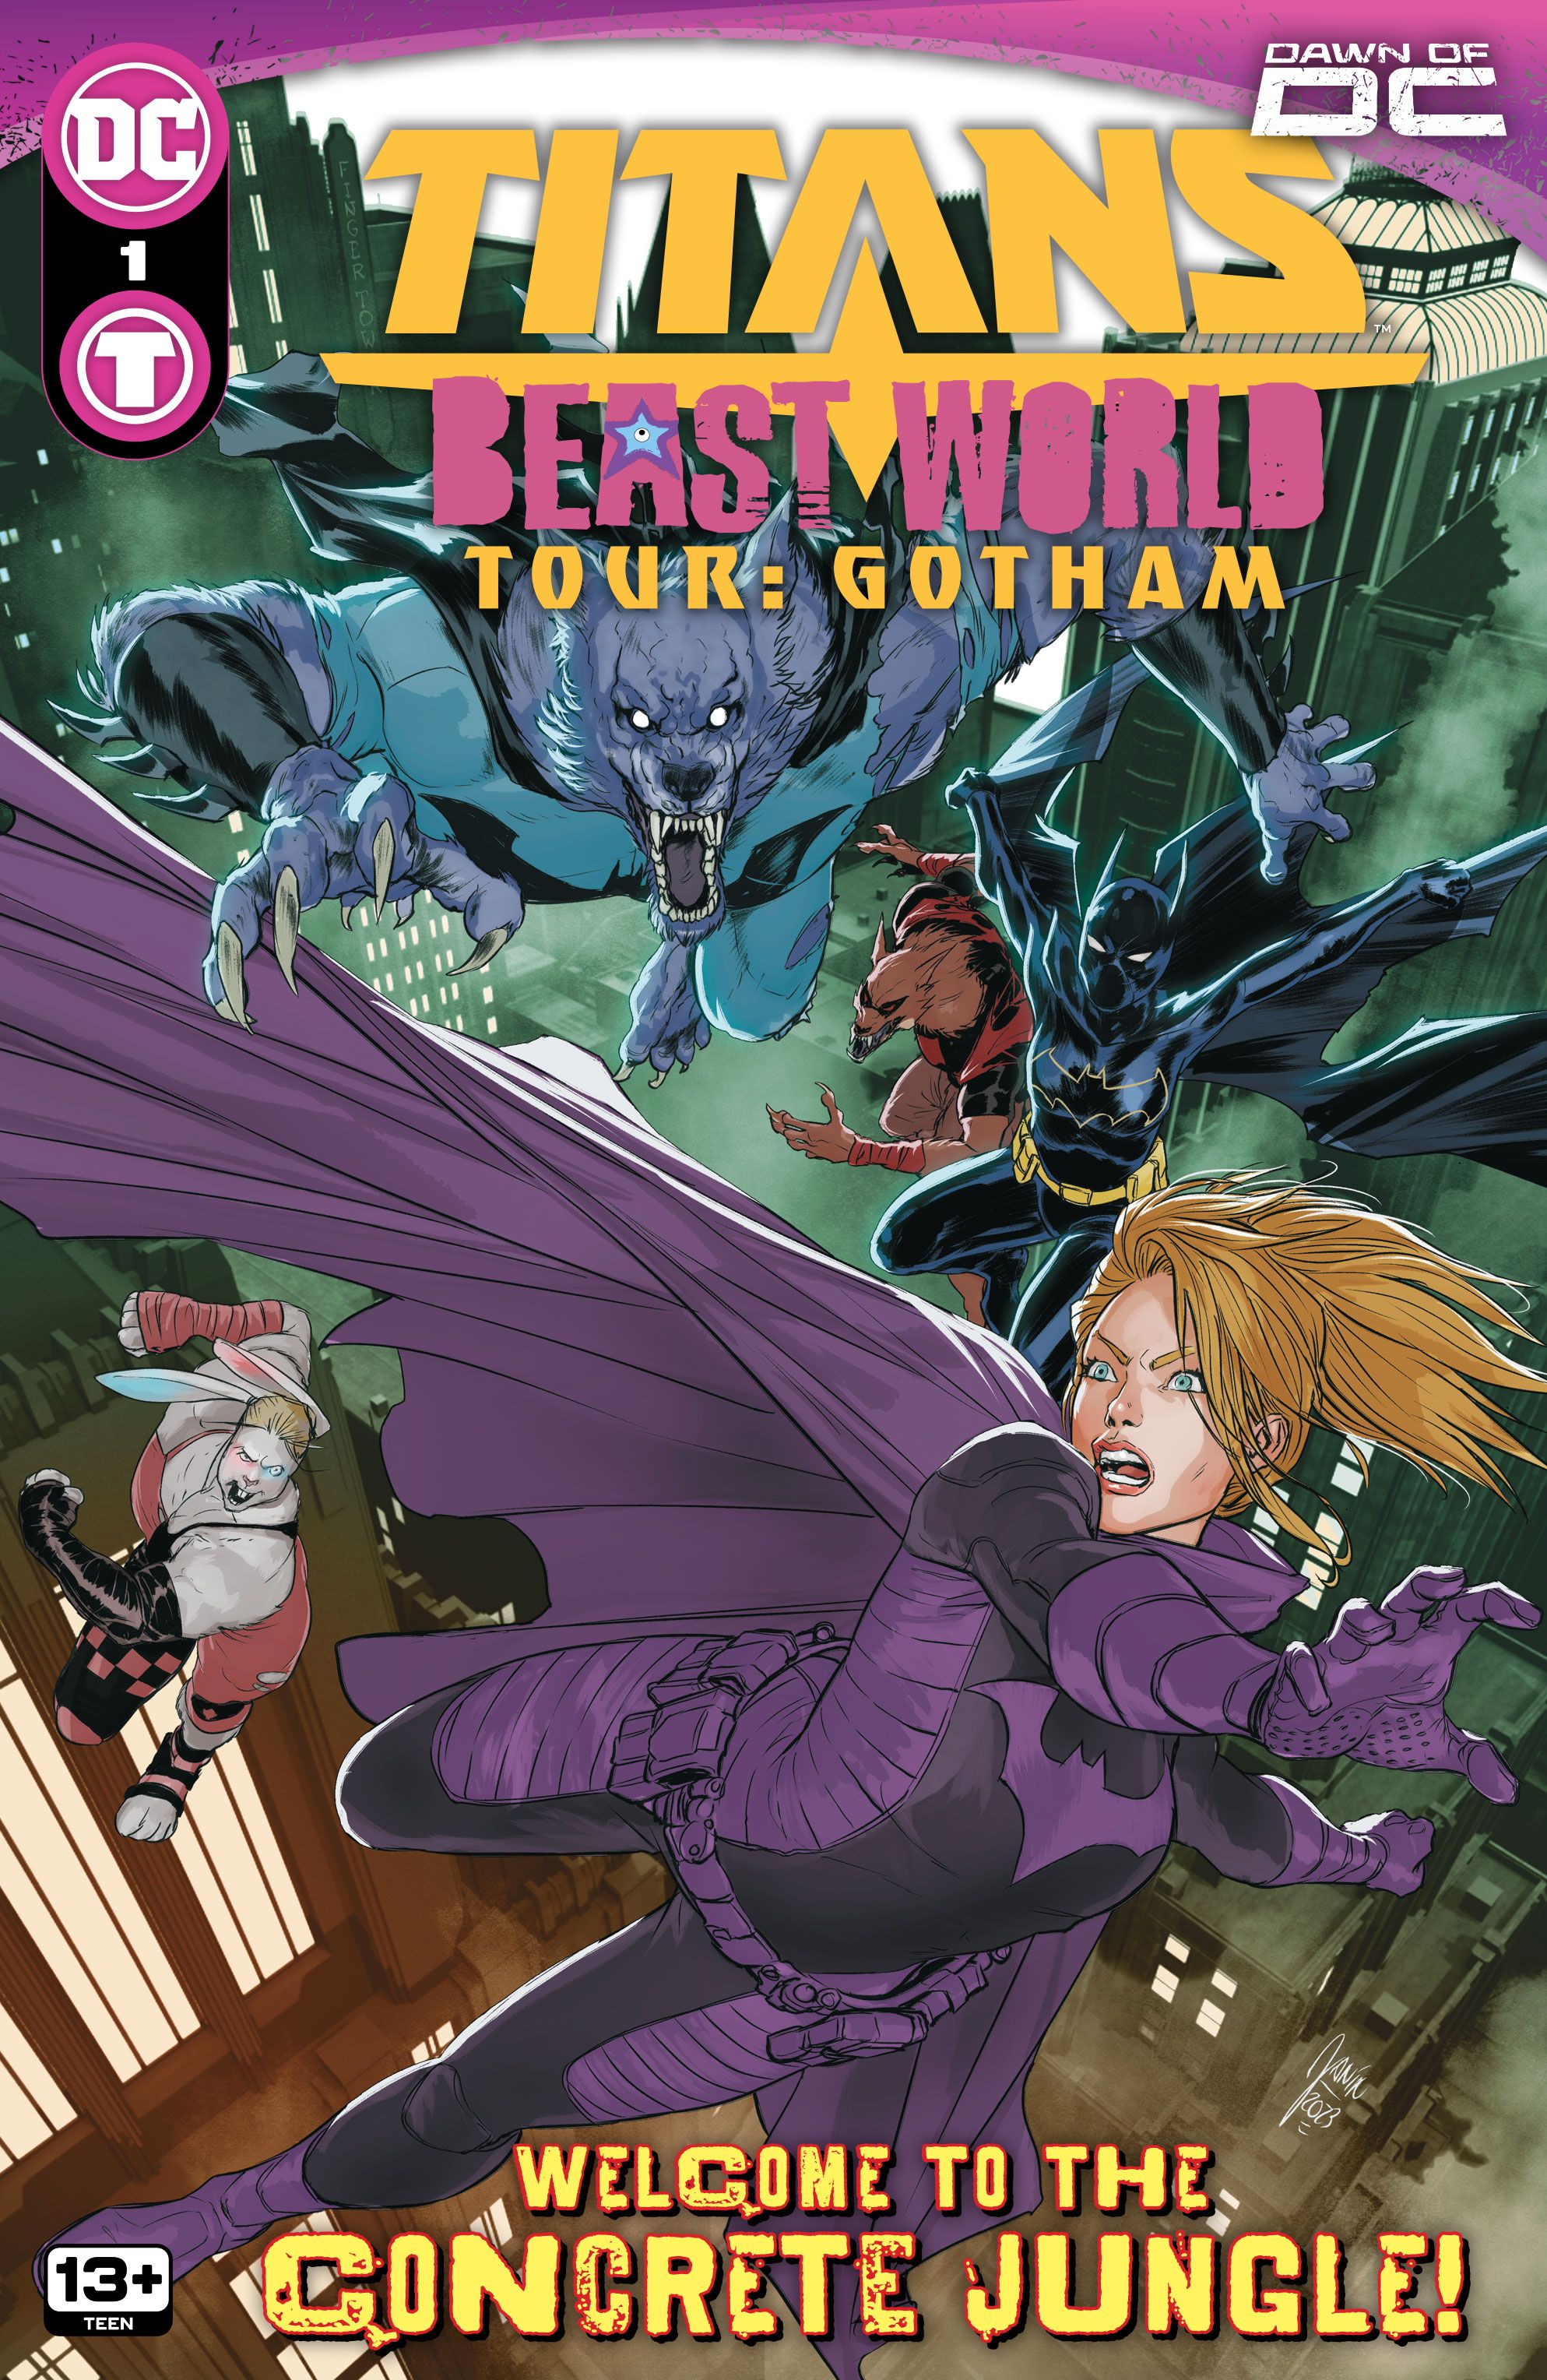 Titans: Beast World Tour - Gotham 1 Main Cover: Costumed superheroes being chased by animal monsters.